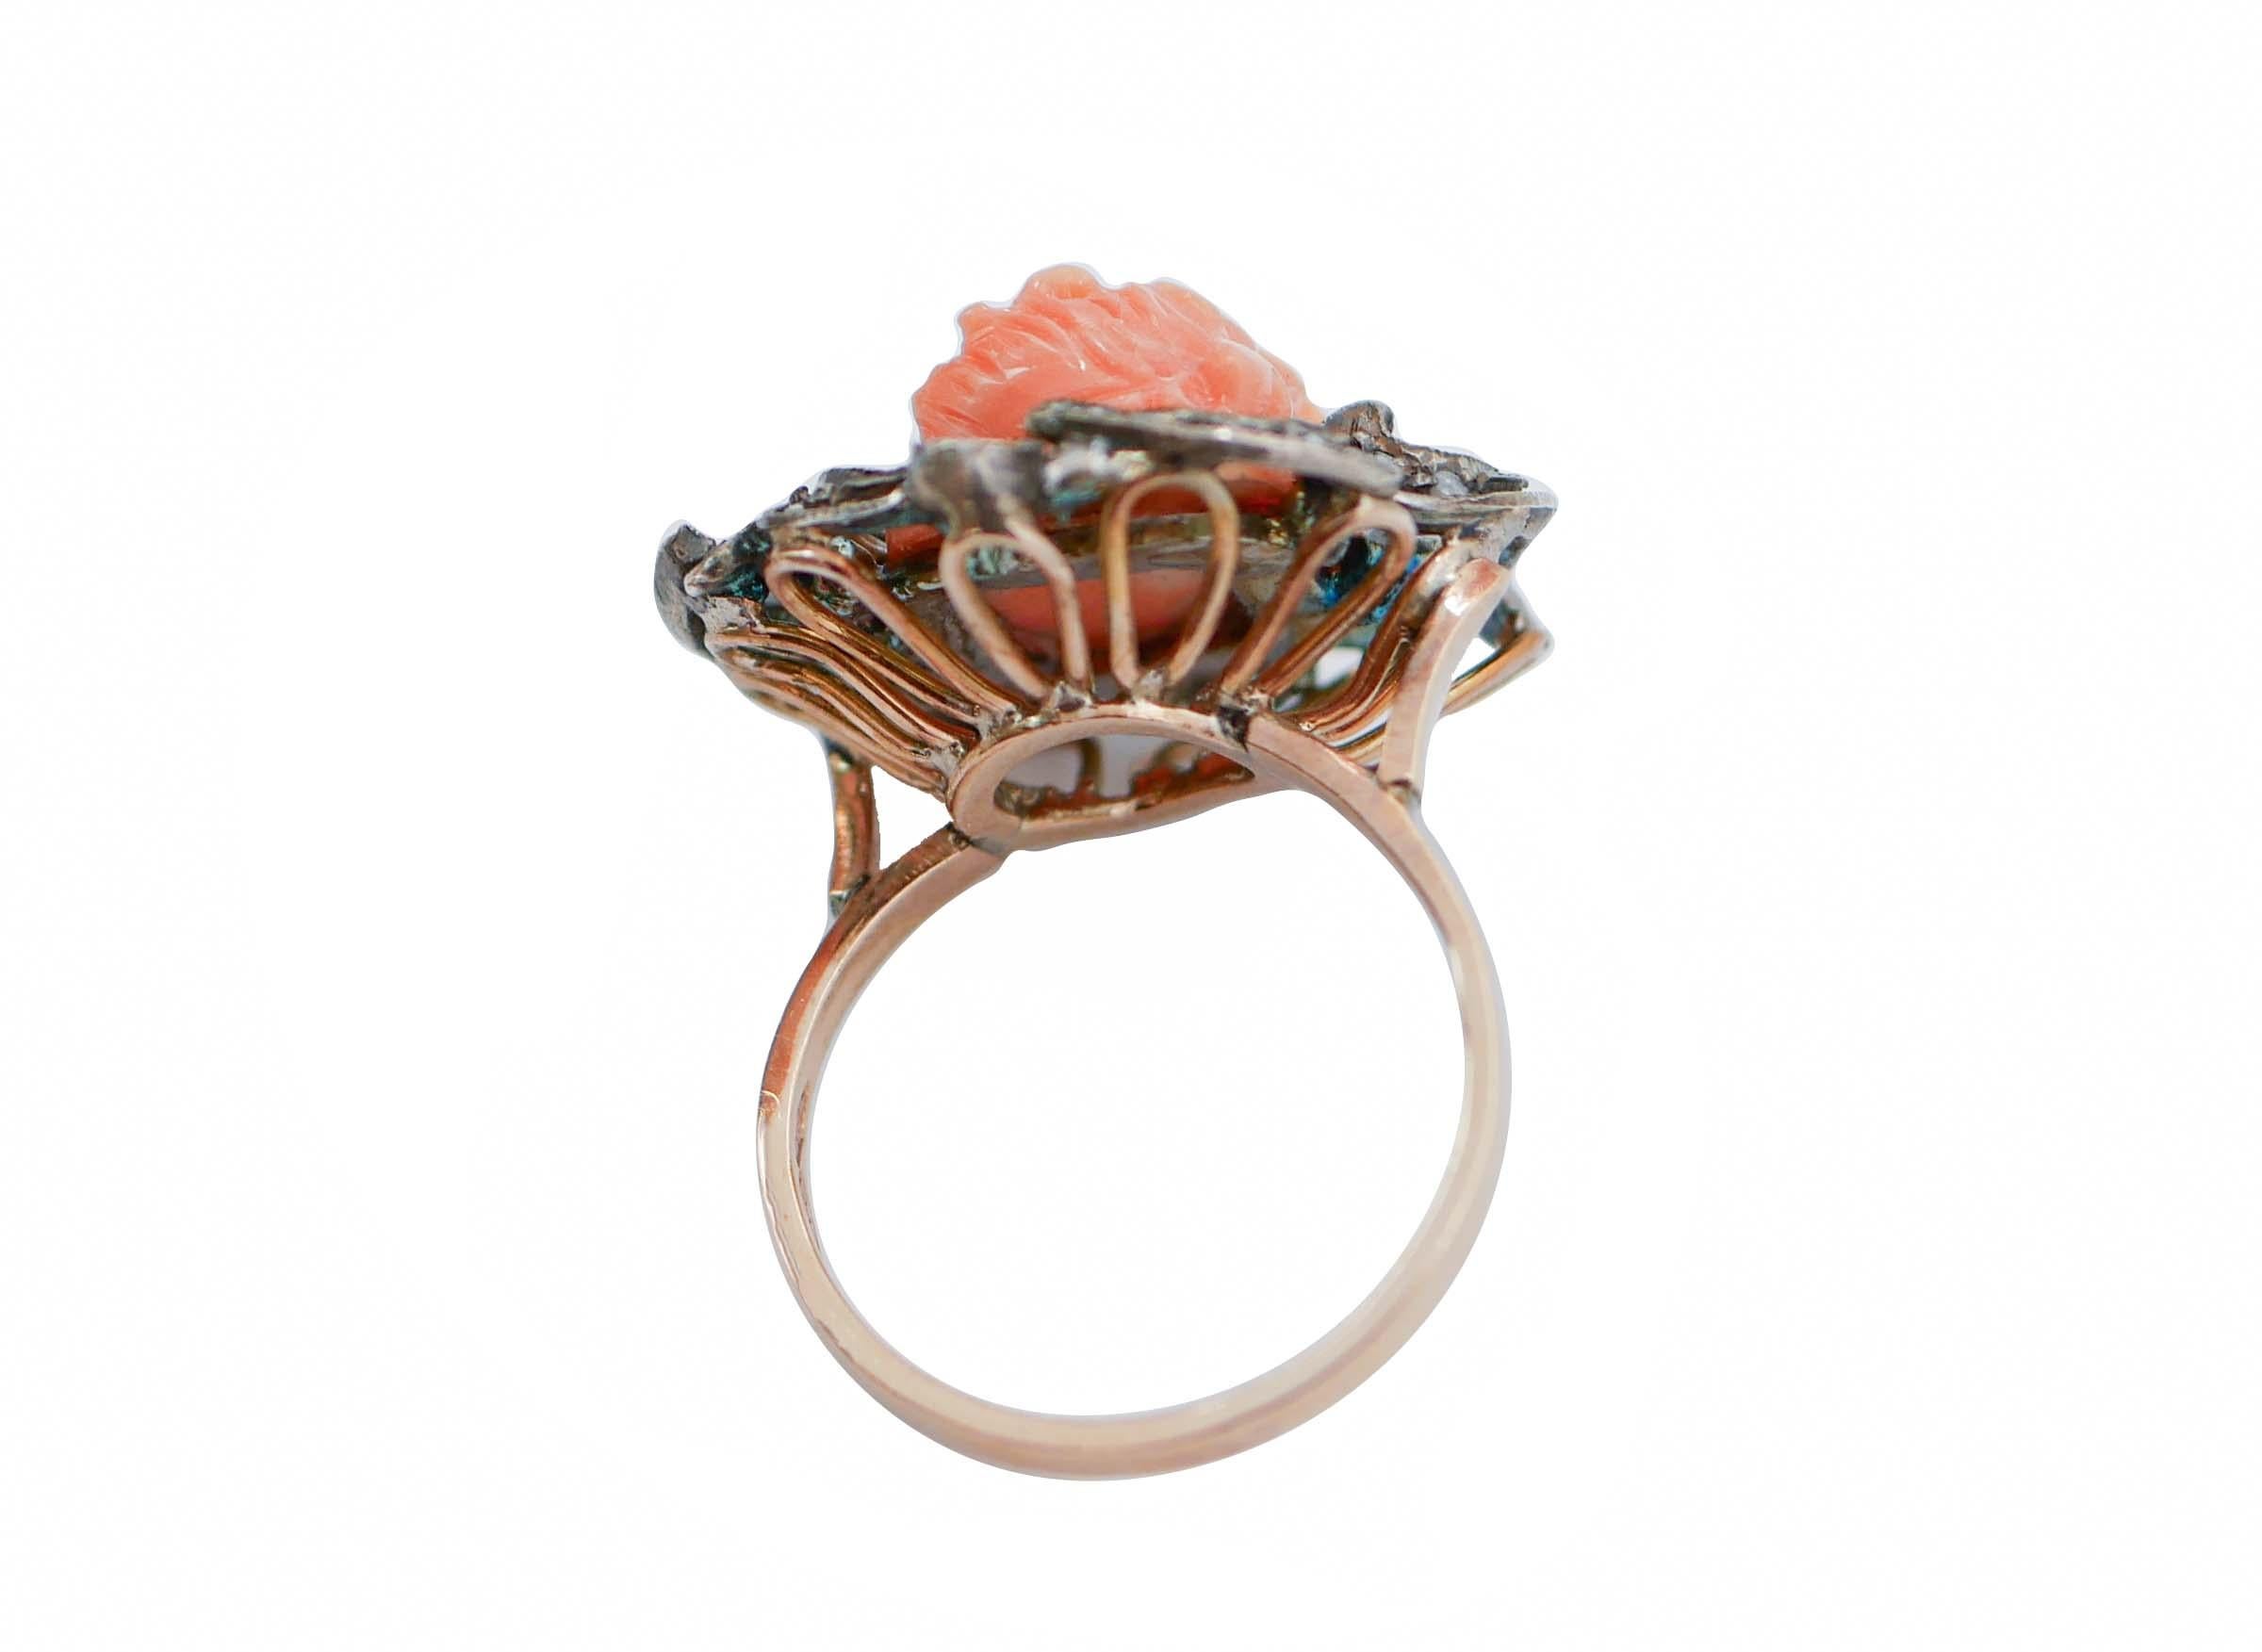 Retro Coral, Diamonds, Emeralds, 14 Karat Rose Gold and Silver Ring. For Sale